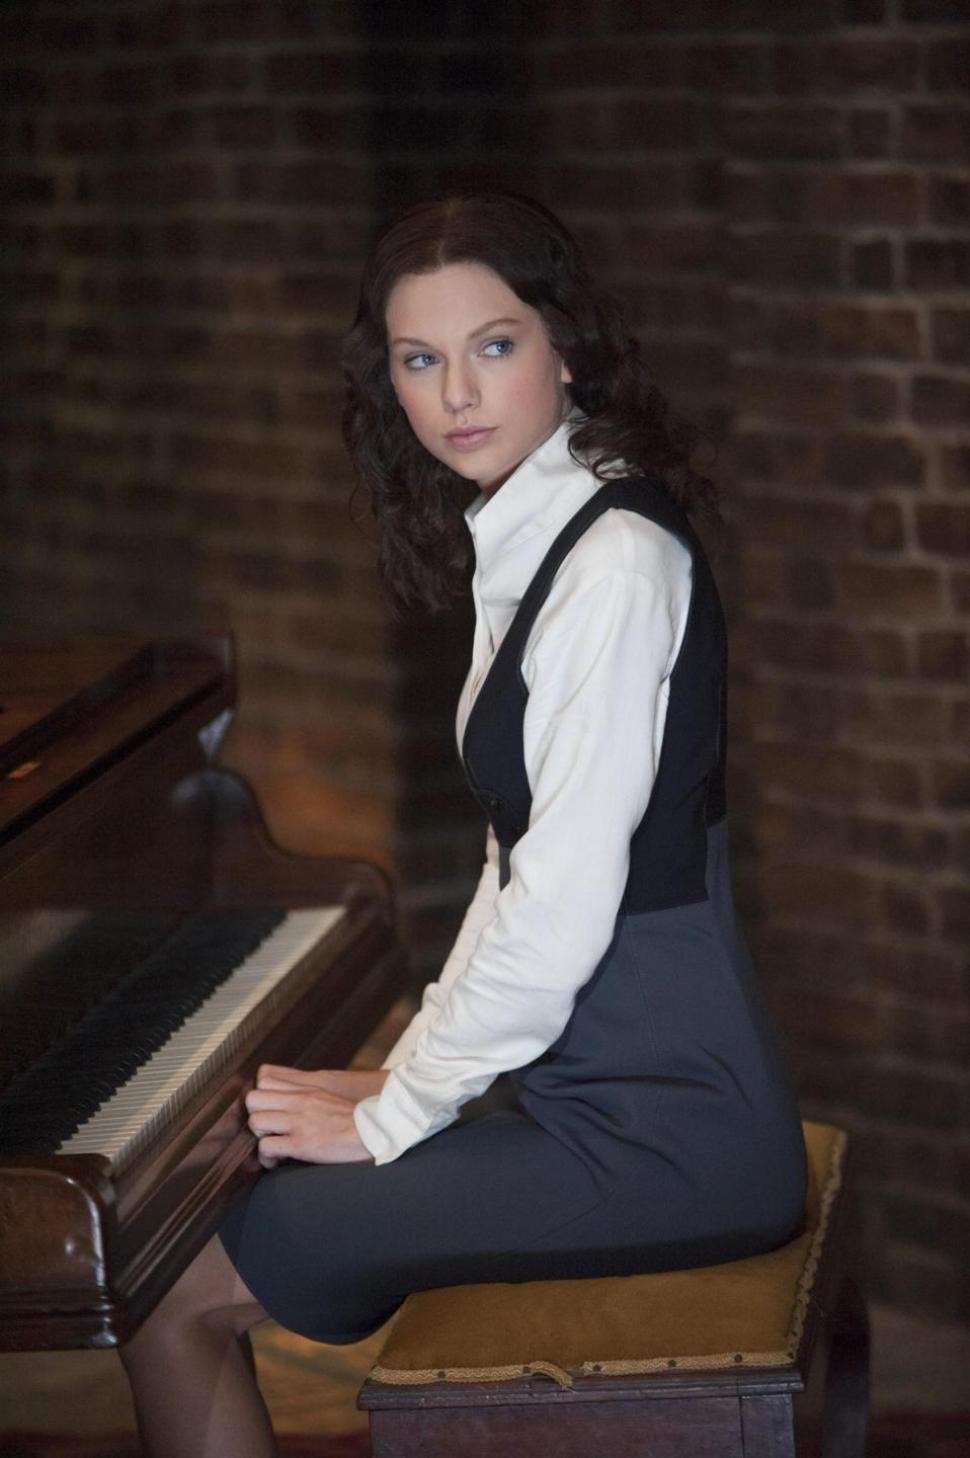 Taylor Swift in The Giver